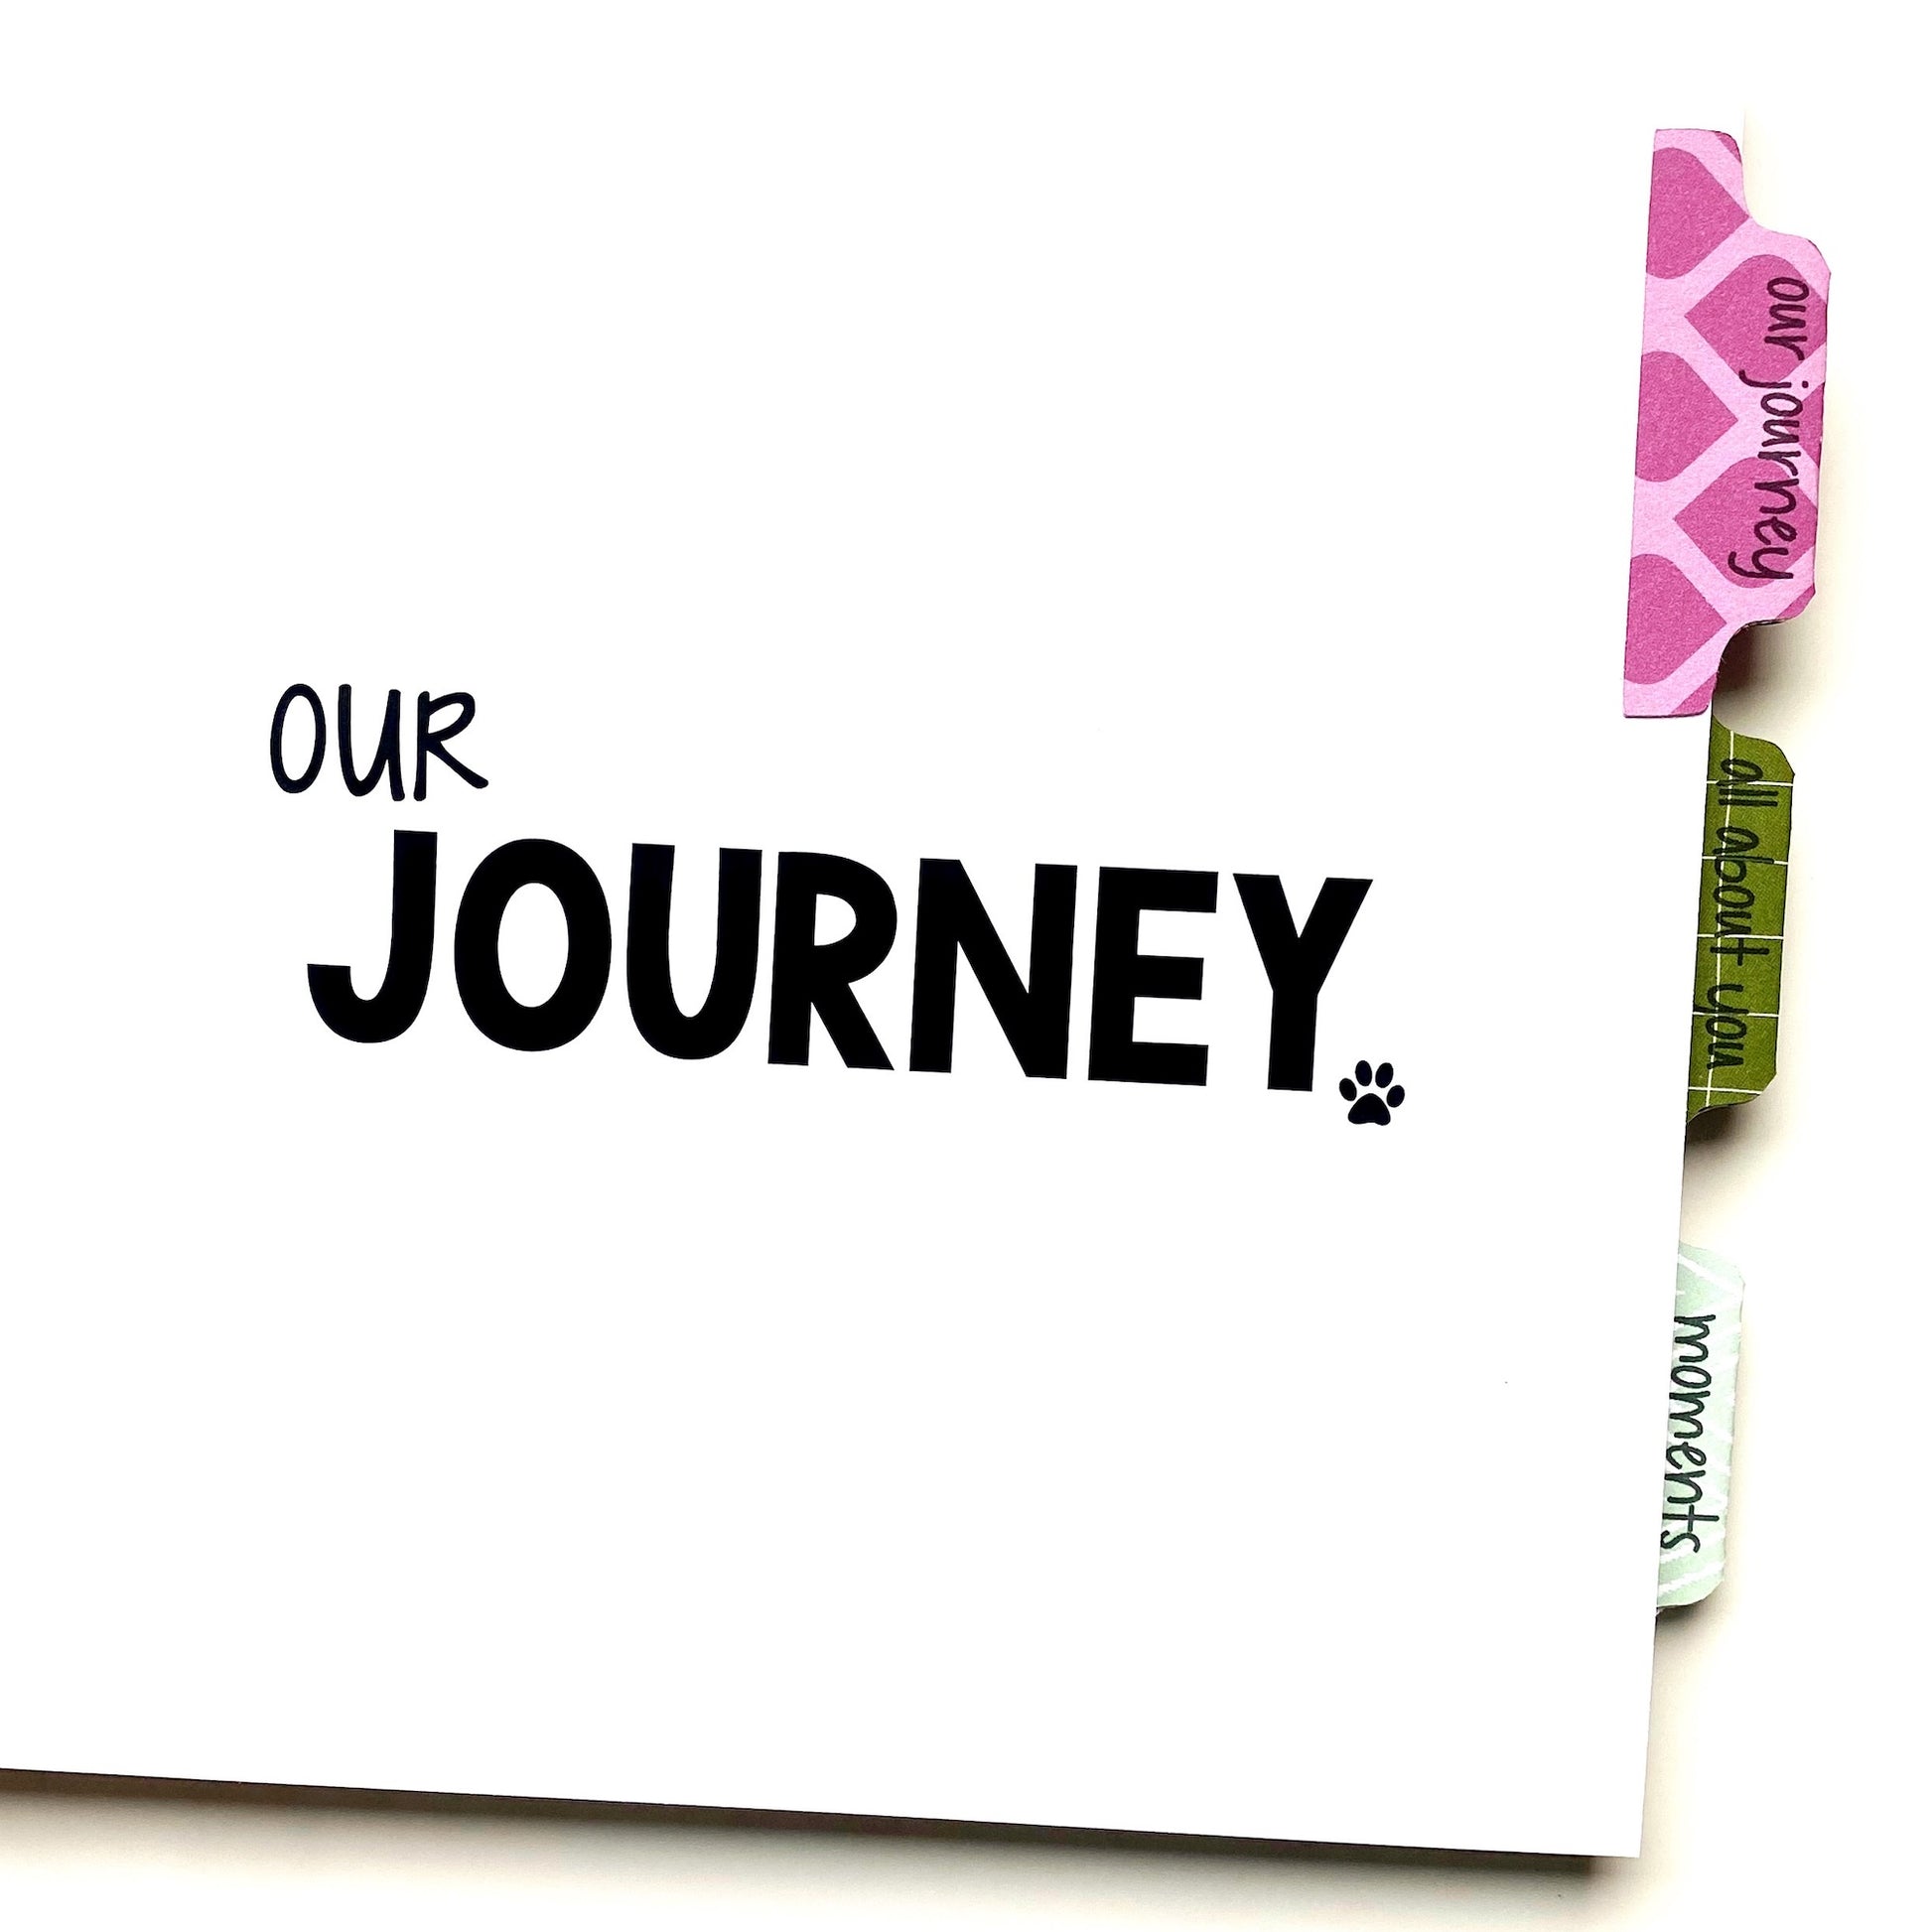 Dog Memory Book is tabbed for three different sections. The sections are titled Our Journey, All About You and Moments.